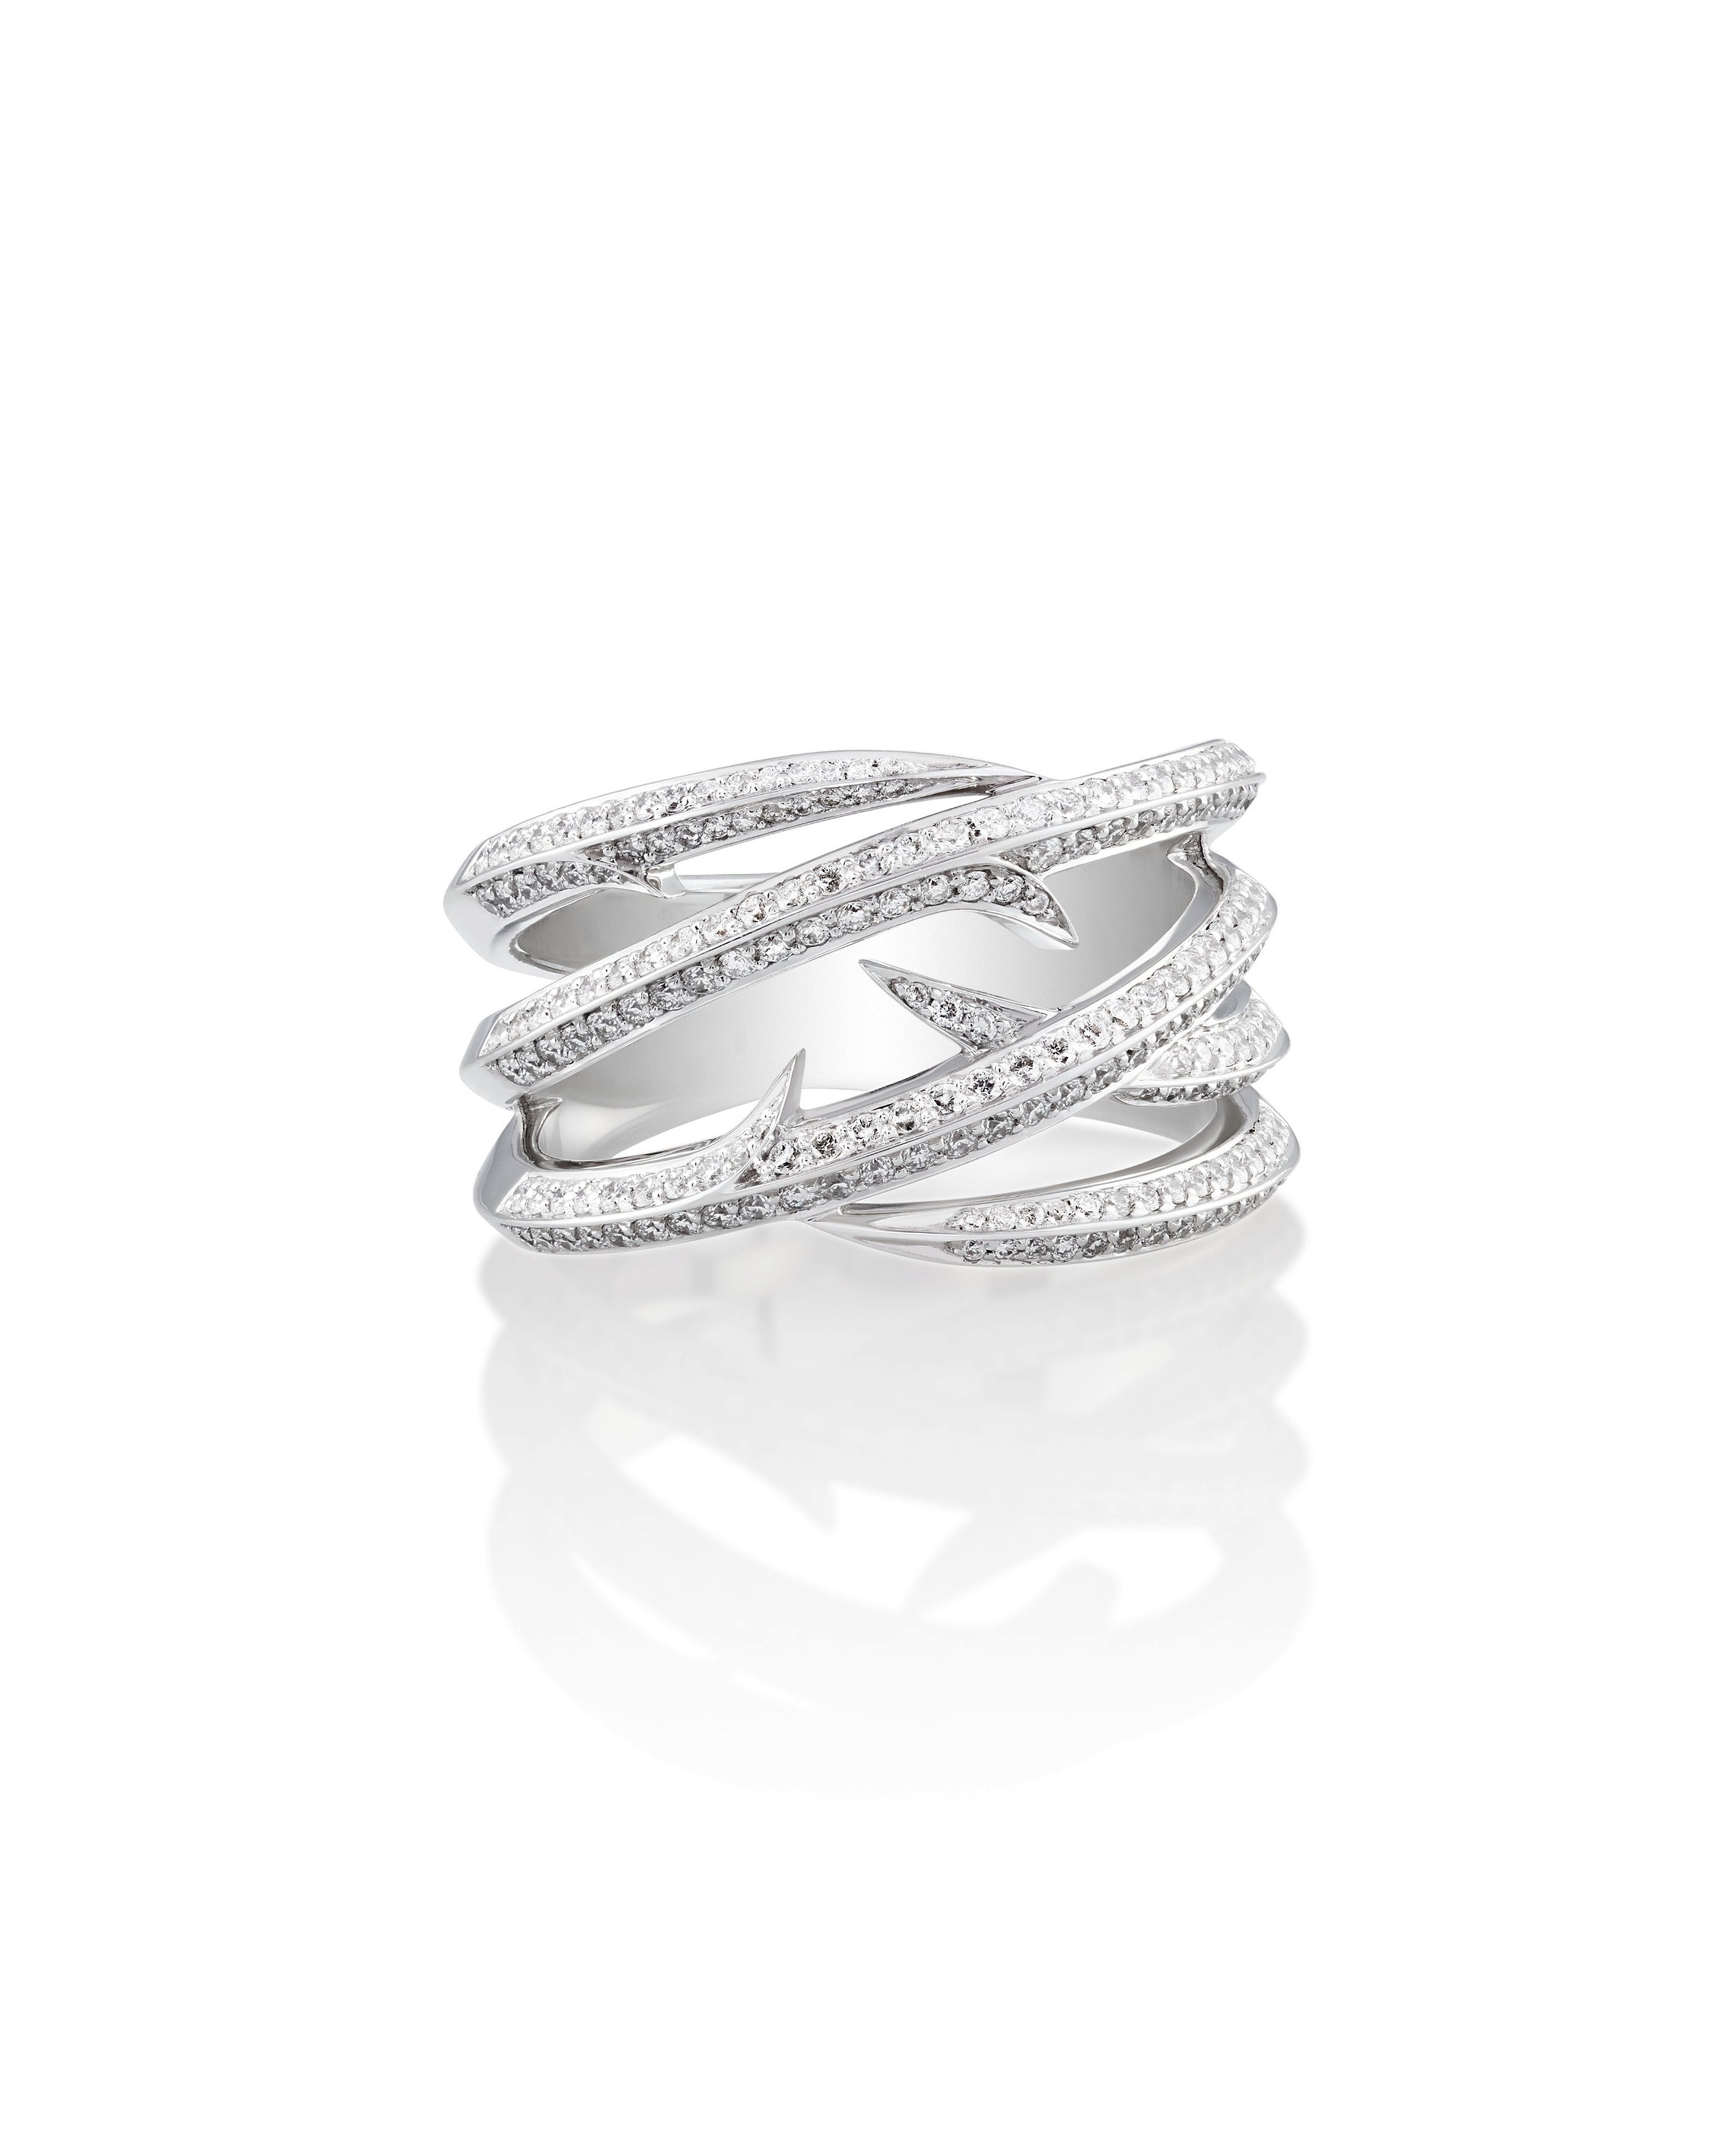 Thorn Embrace Wrap Band Ring with White Diamonds in 18kt White Gold